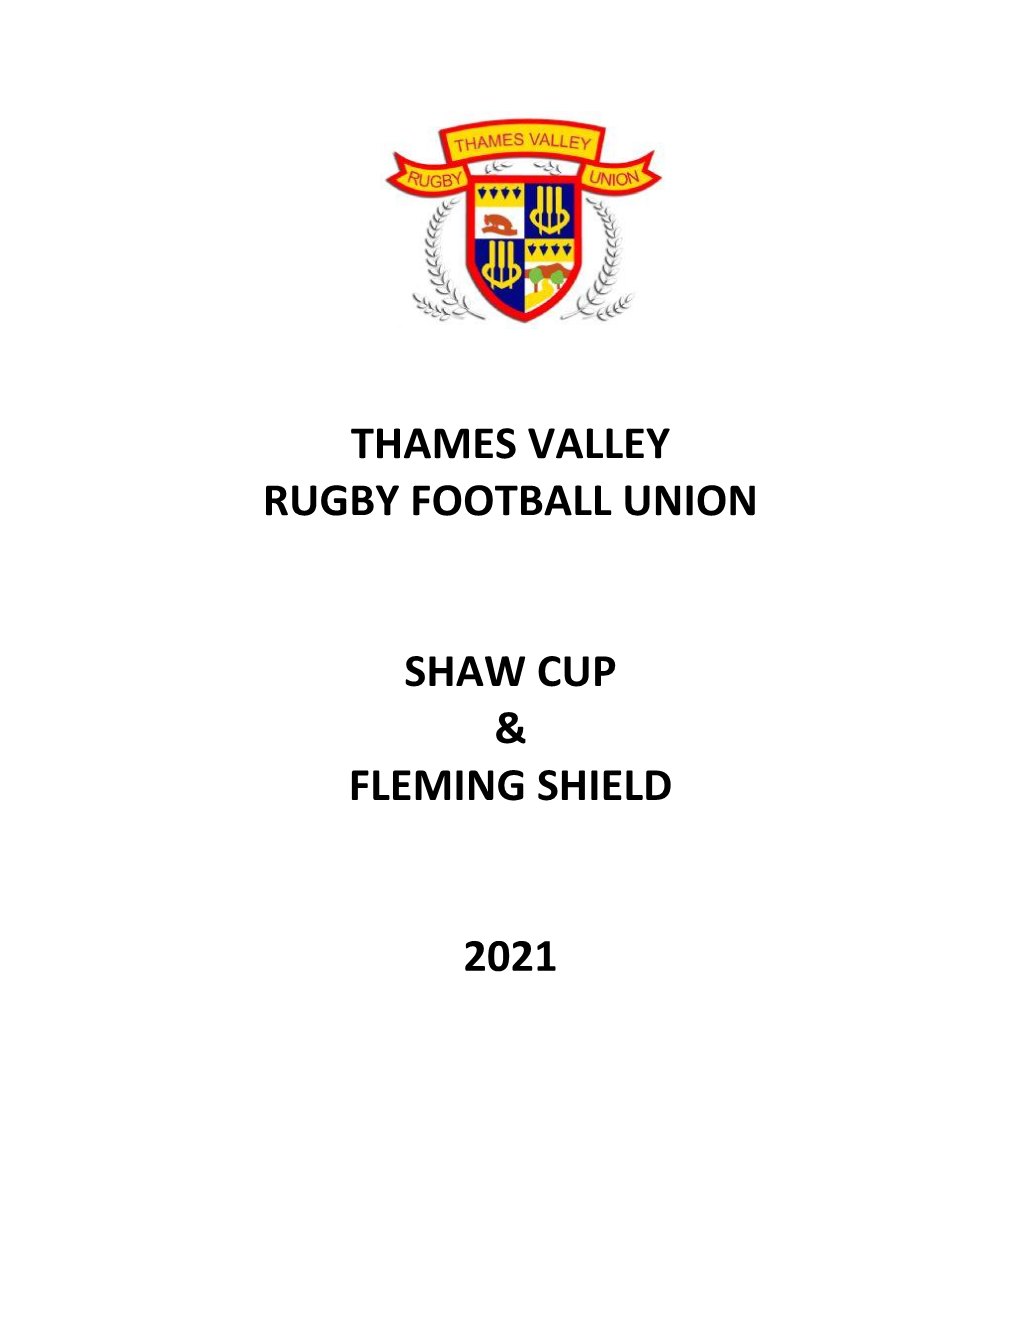 Shaw Cup & Fleming Shield Tournament